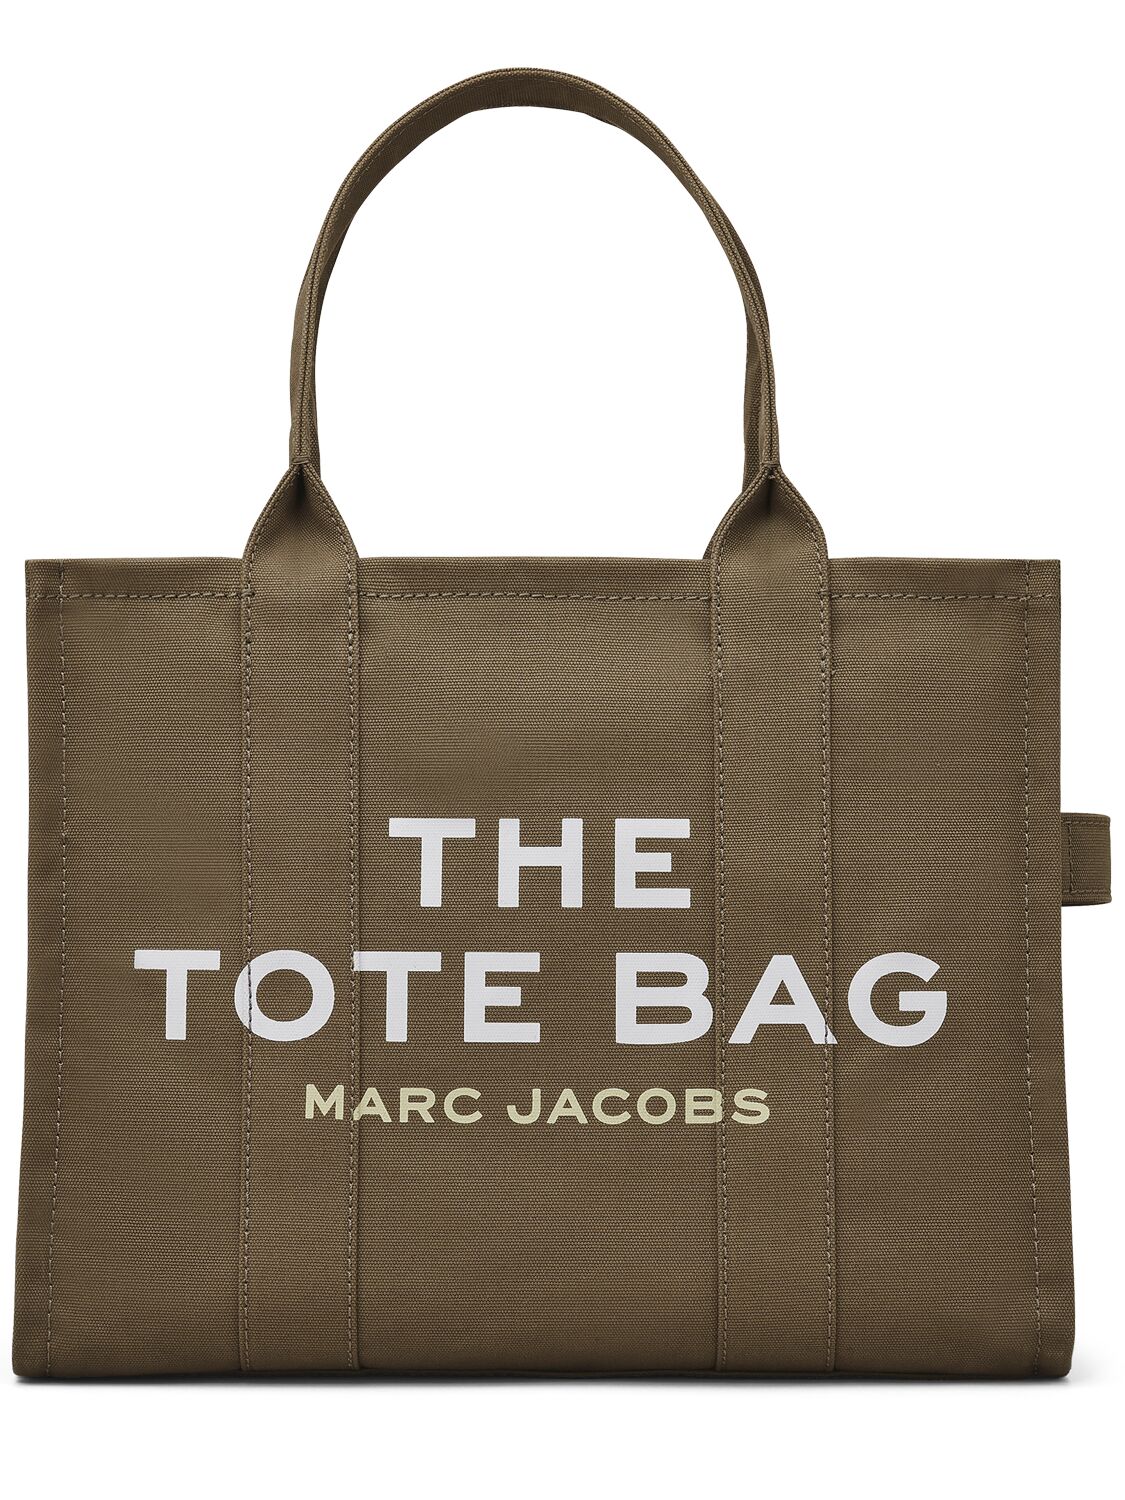 The Large Tote Cotton Tote Bag